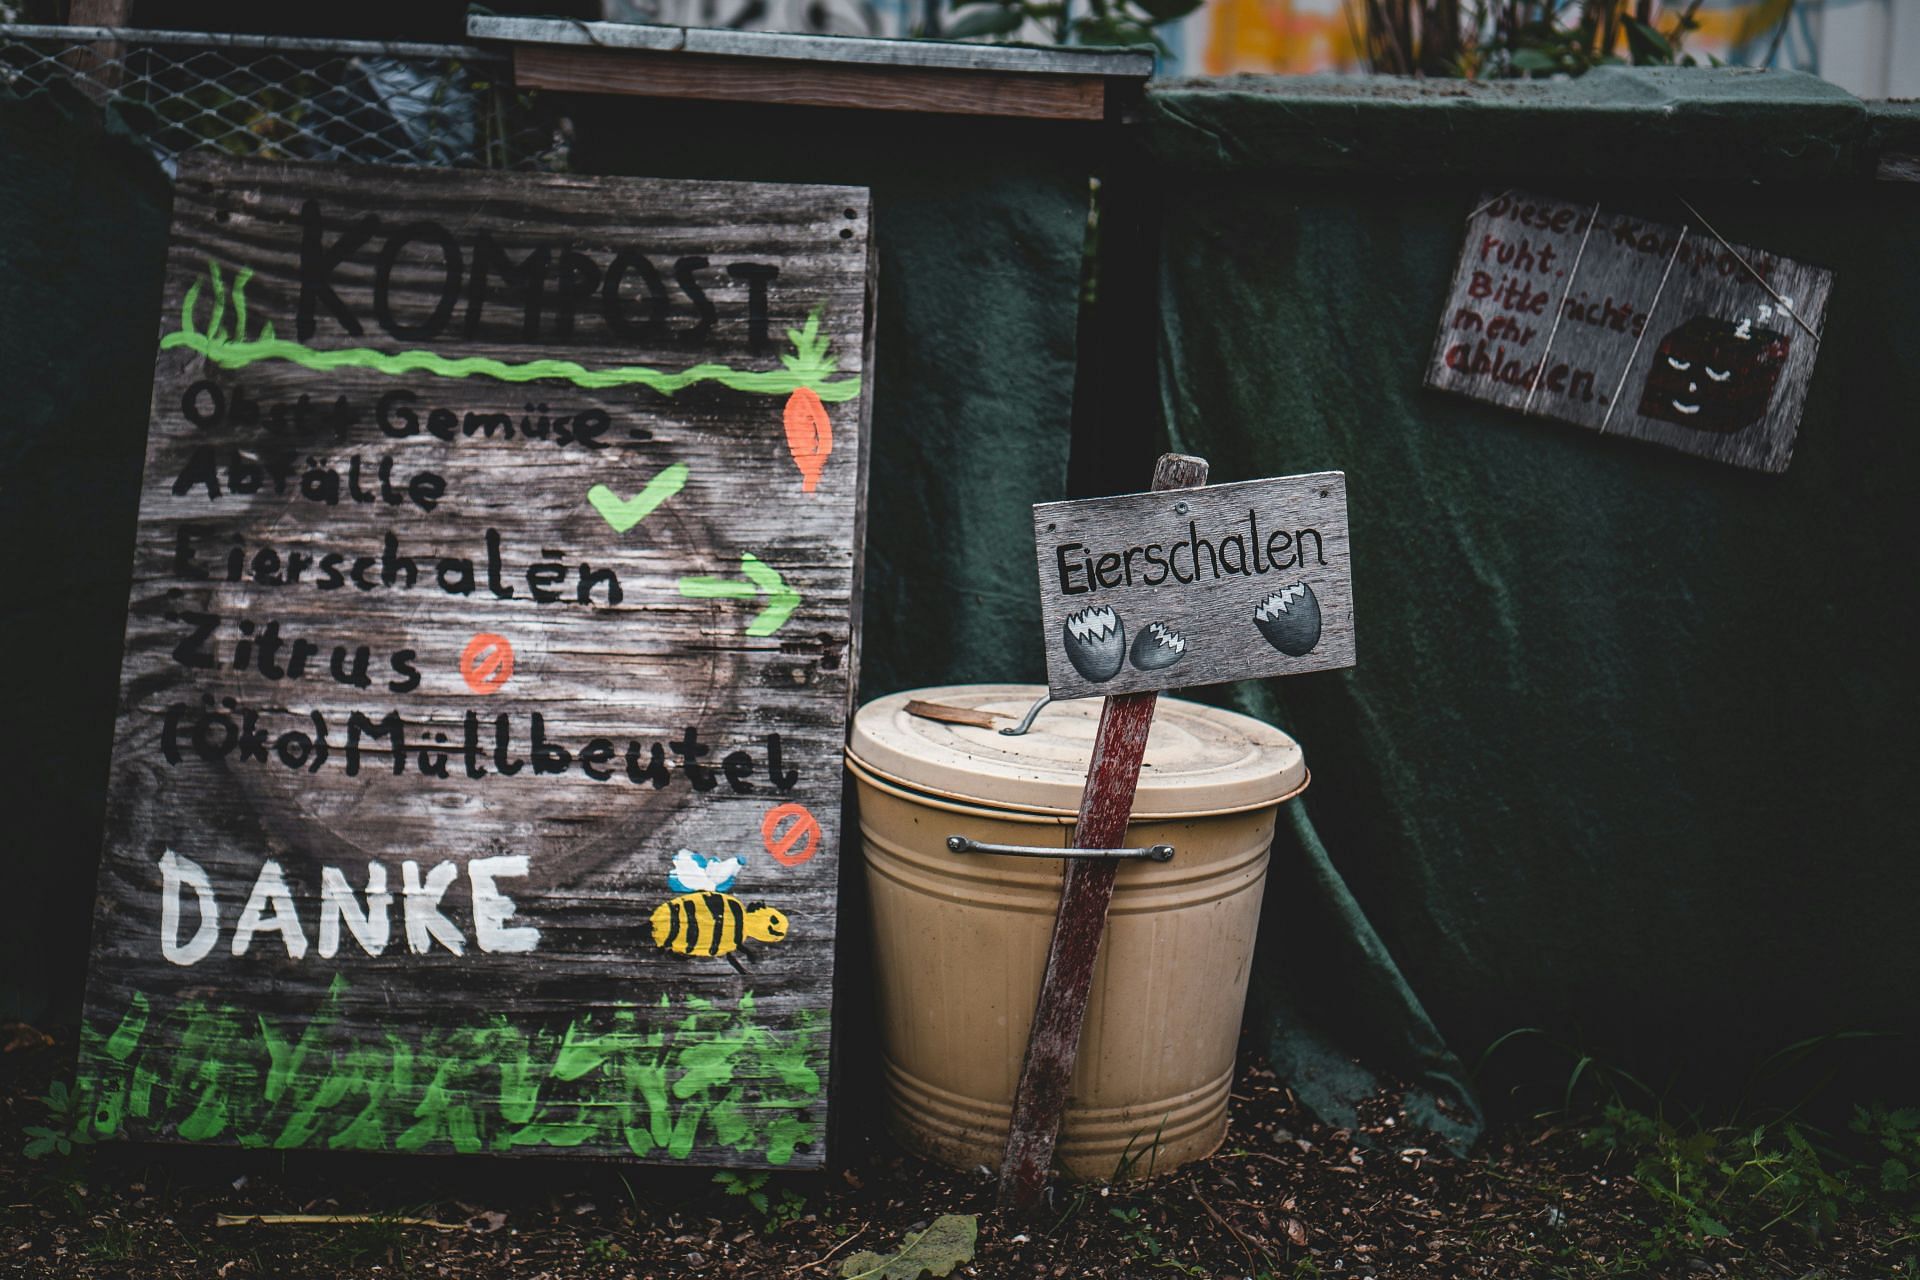 Composting can be done with the scraps (Image by Jonathan Kemper/Unsplash)